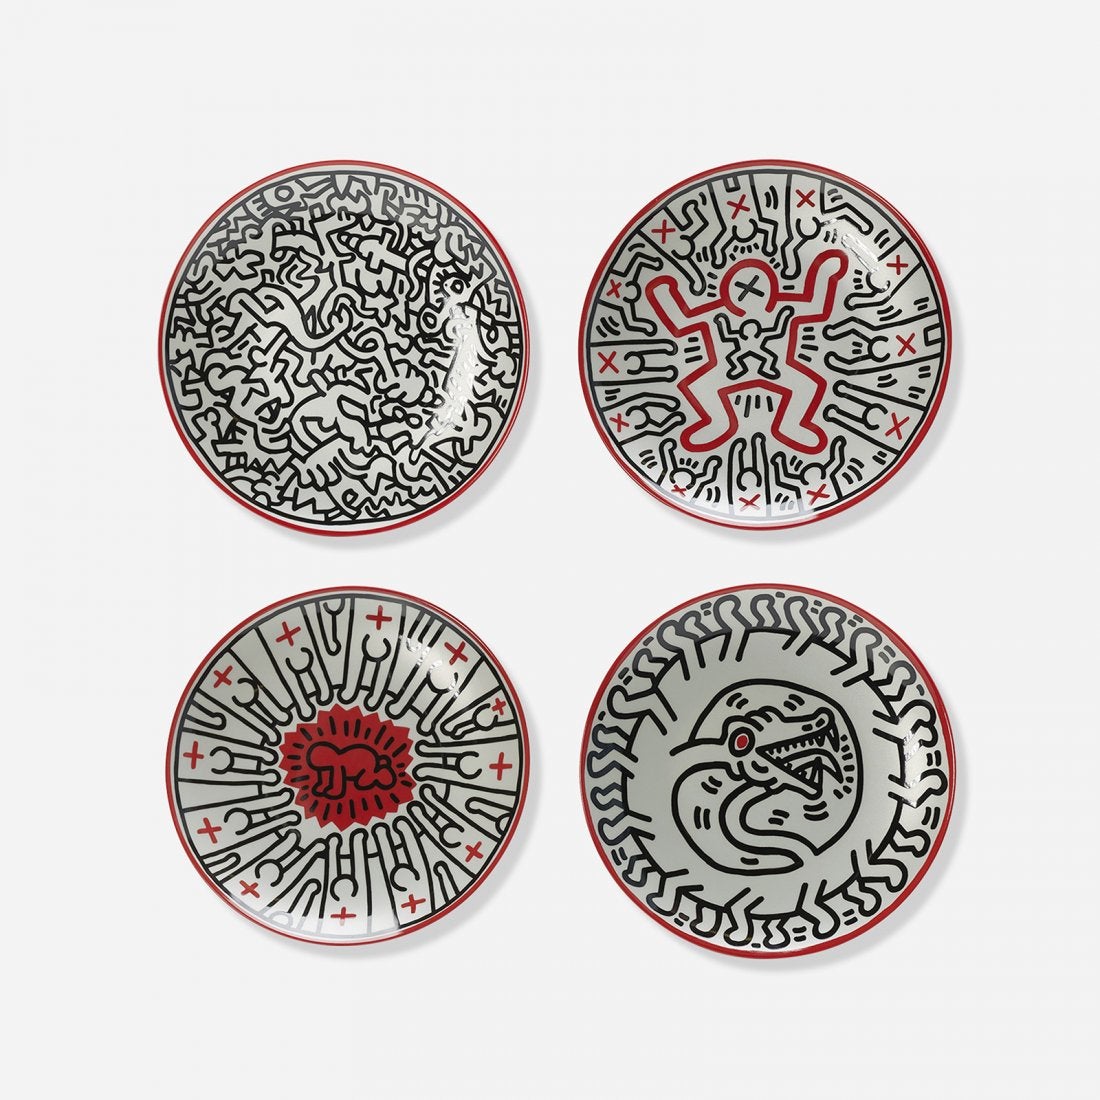 Keith Haring Porcelain Plates